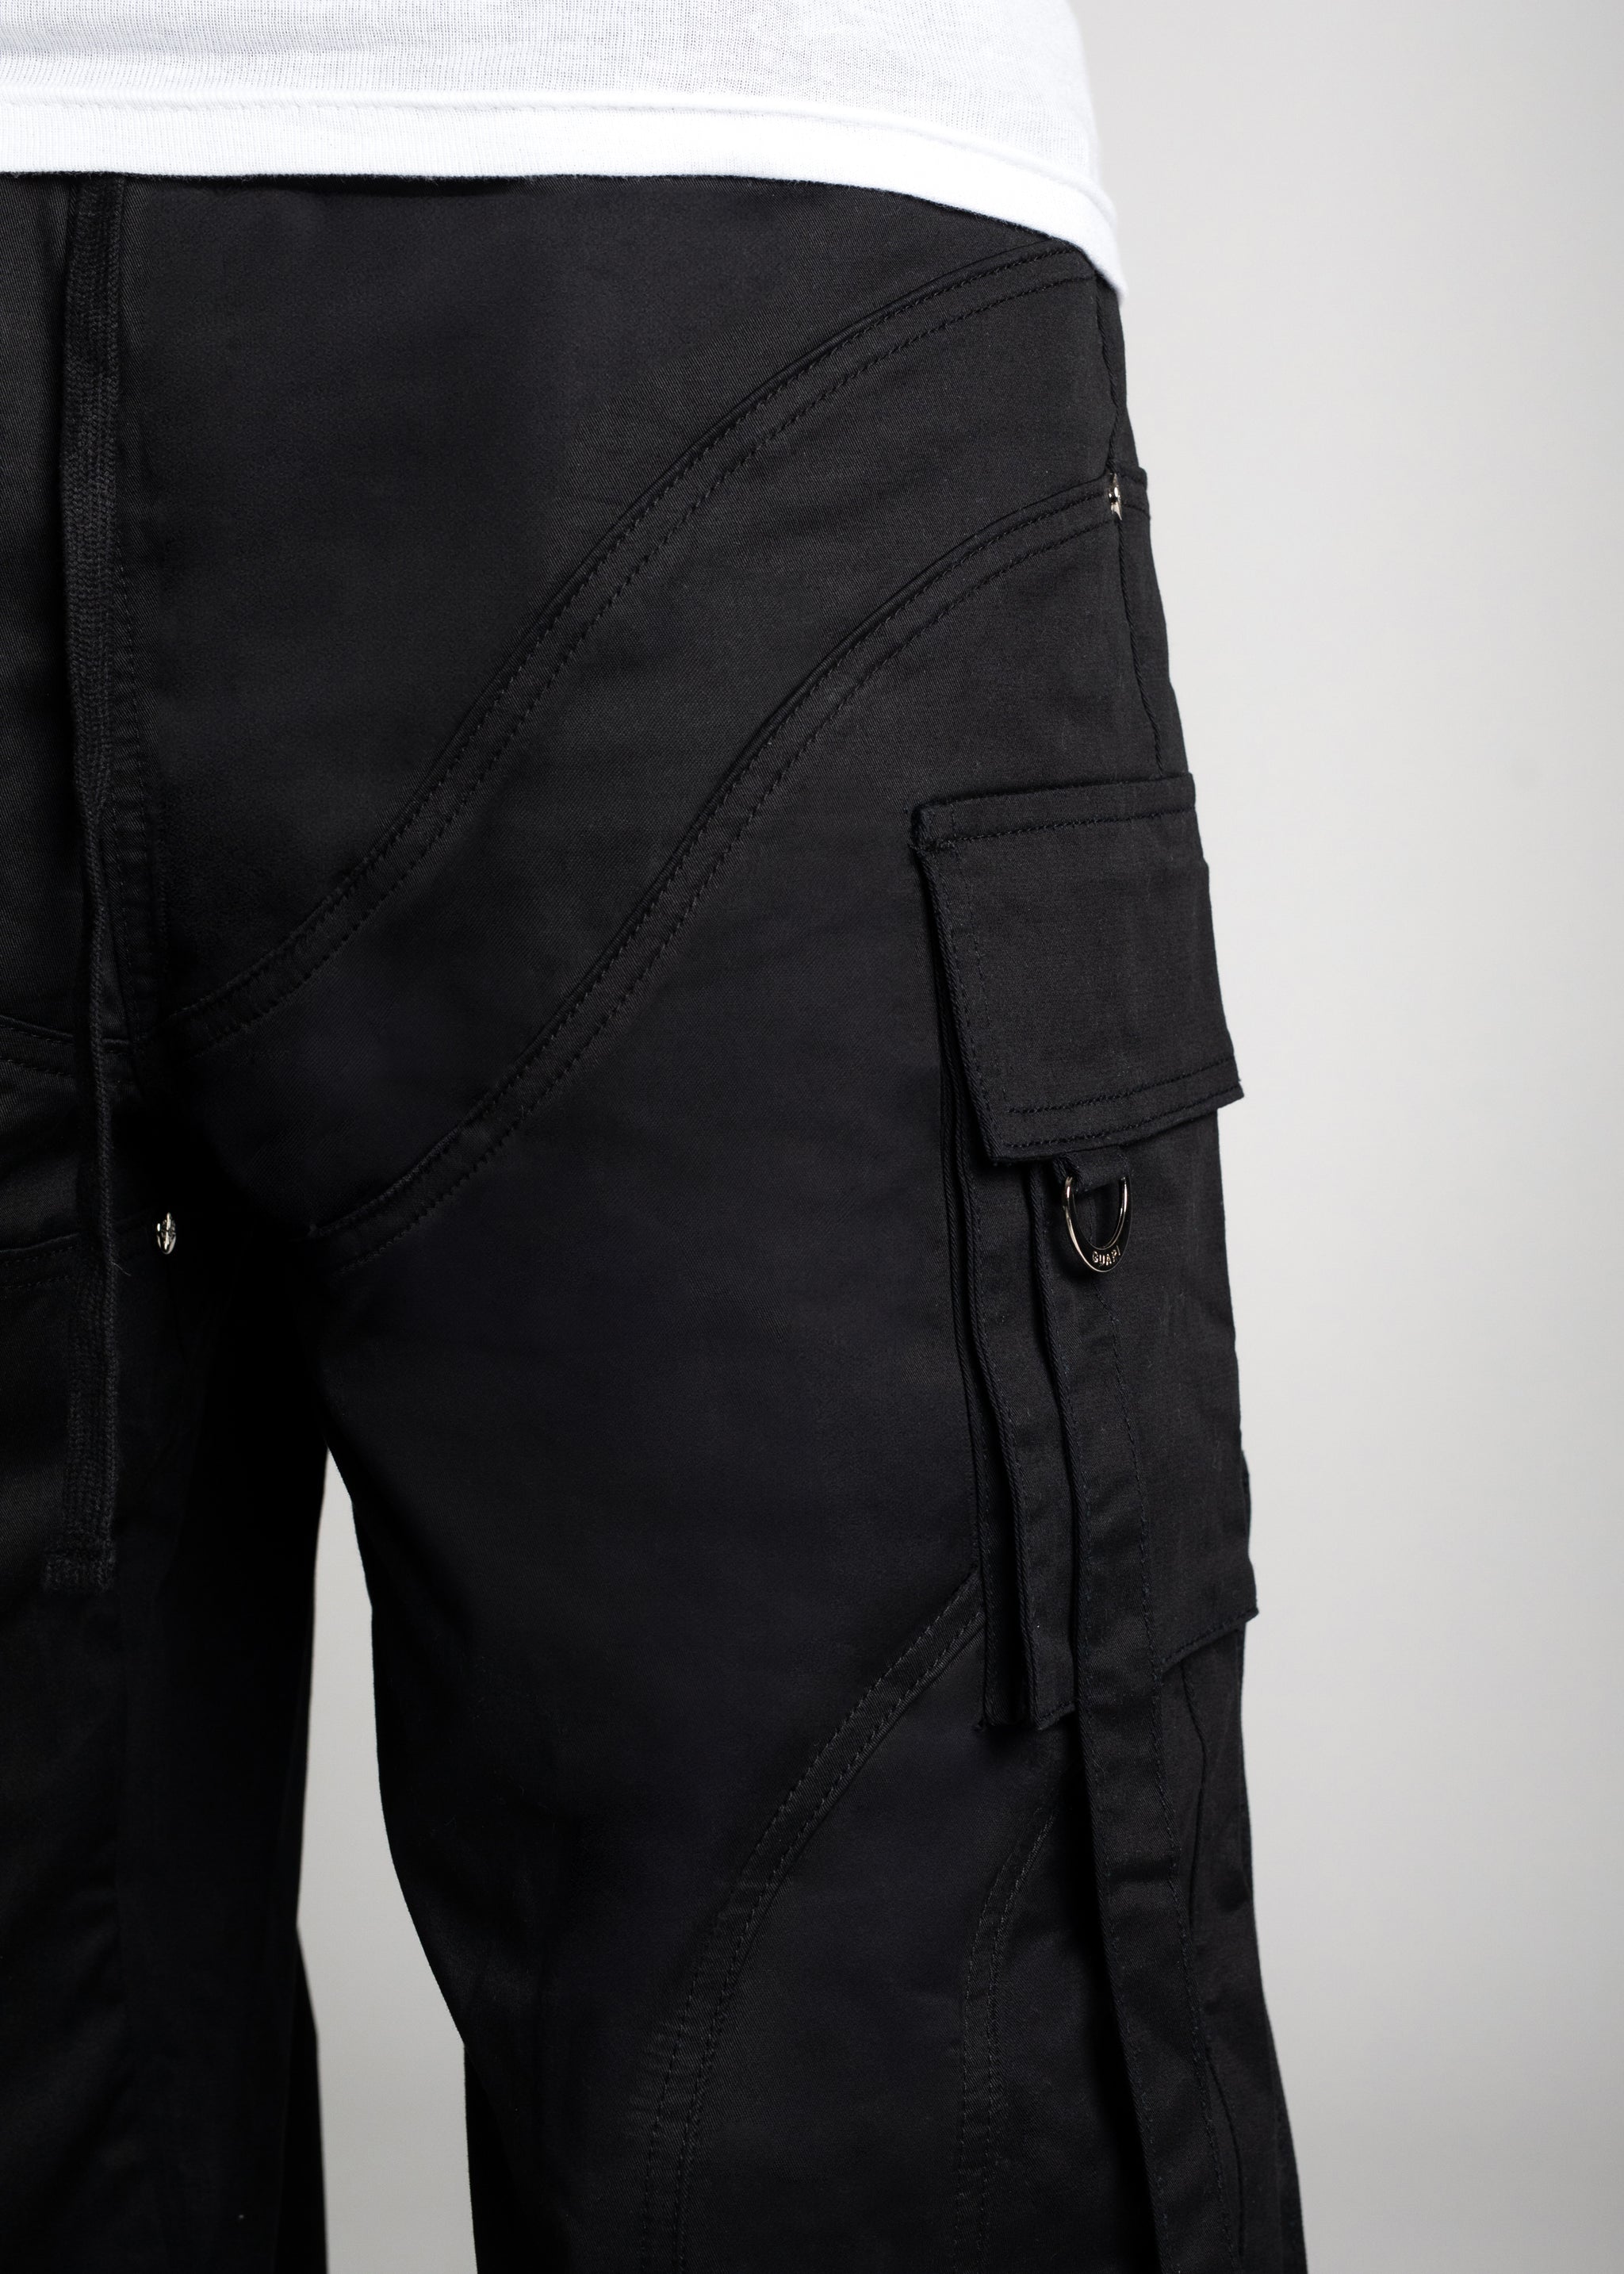 Guapi Limited Edition Obsidian Black Stacked Cargo Pants 34x32